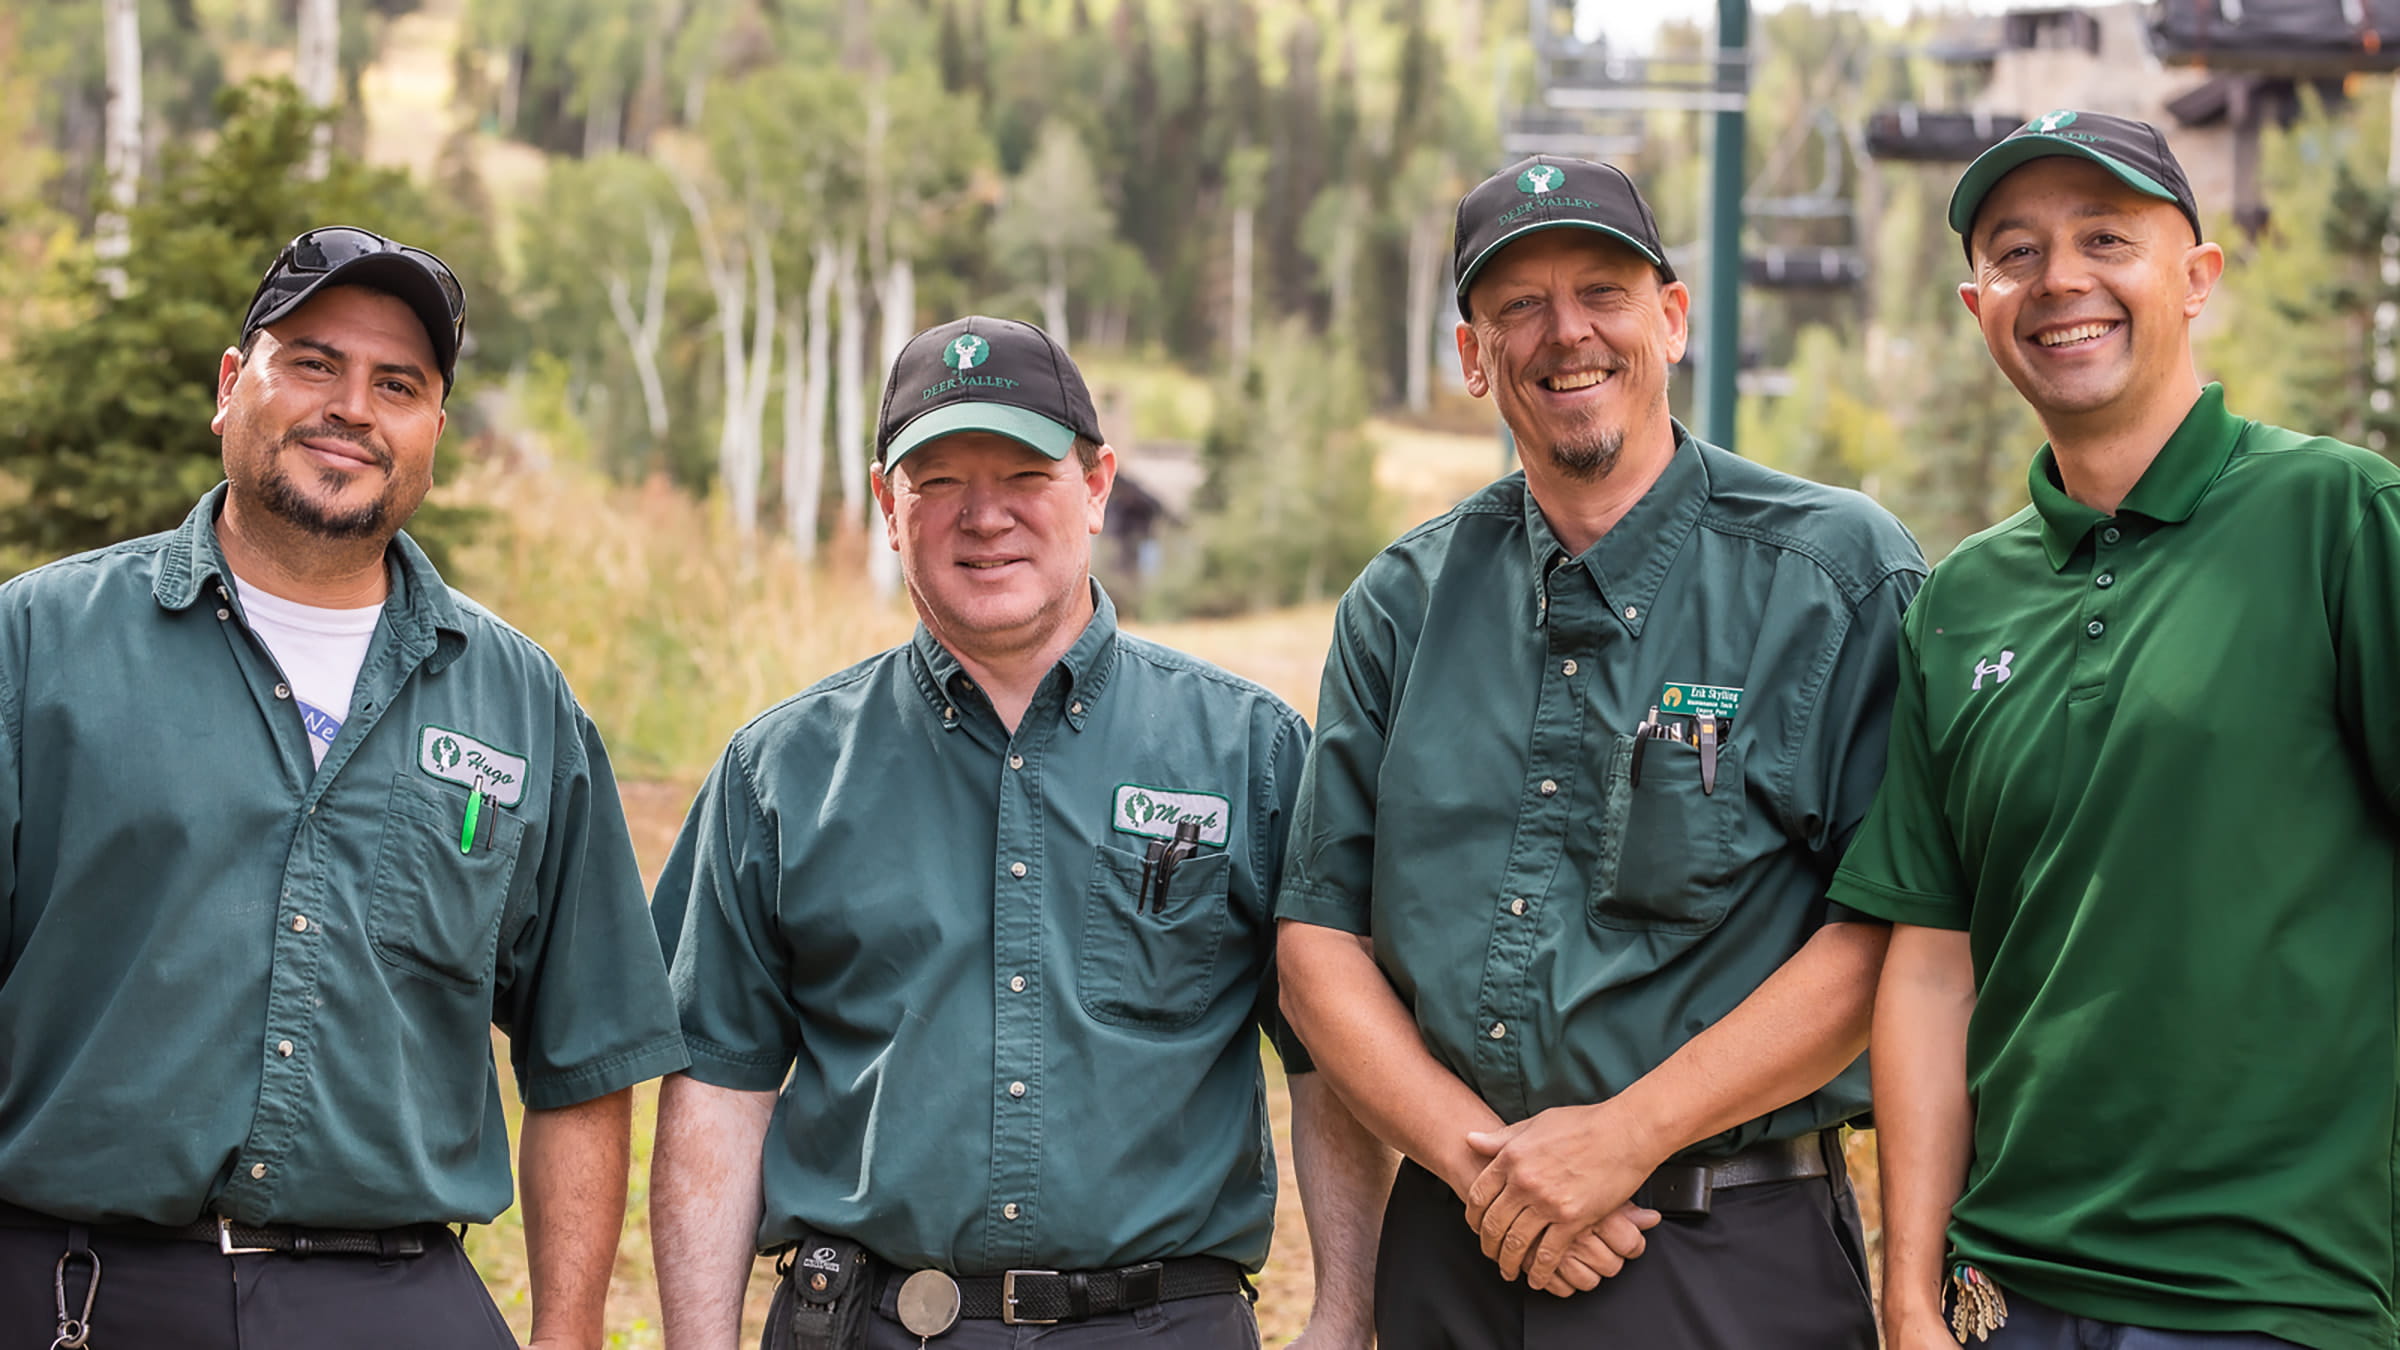 The Deer Valley Maintenance Team smiles for a group picture